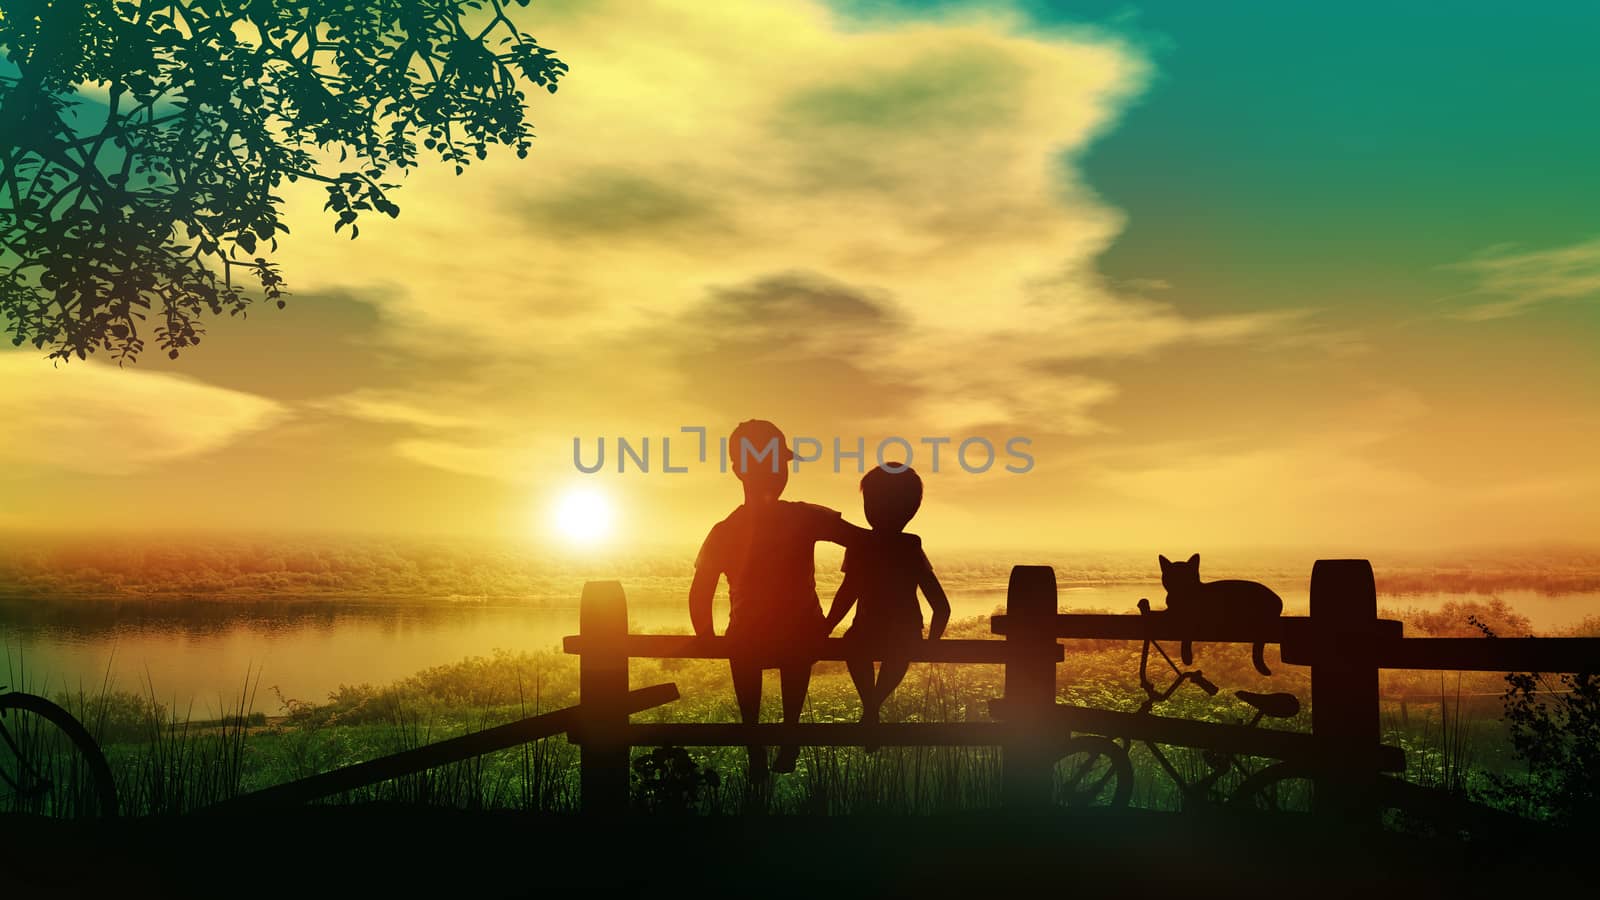 Silhouettes of two boys and a cat on the fence and bicycles lying nearby against the backdrop of summer sunset on the river